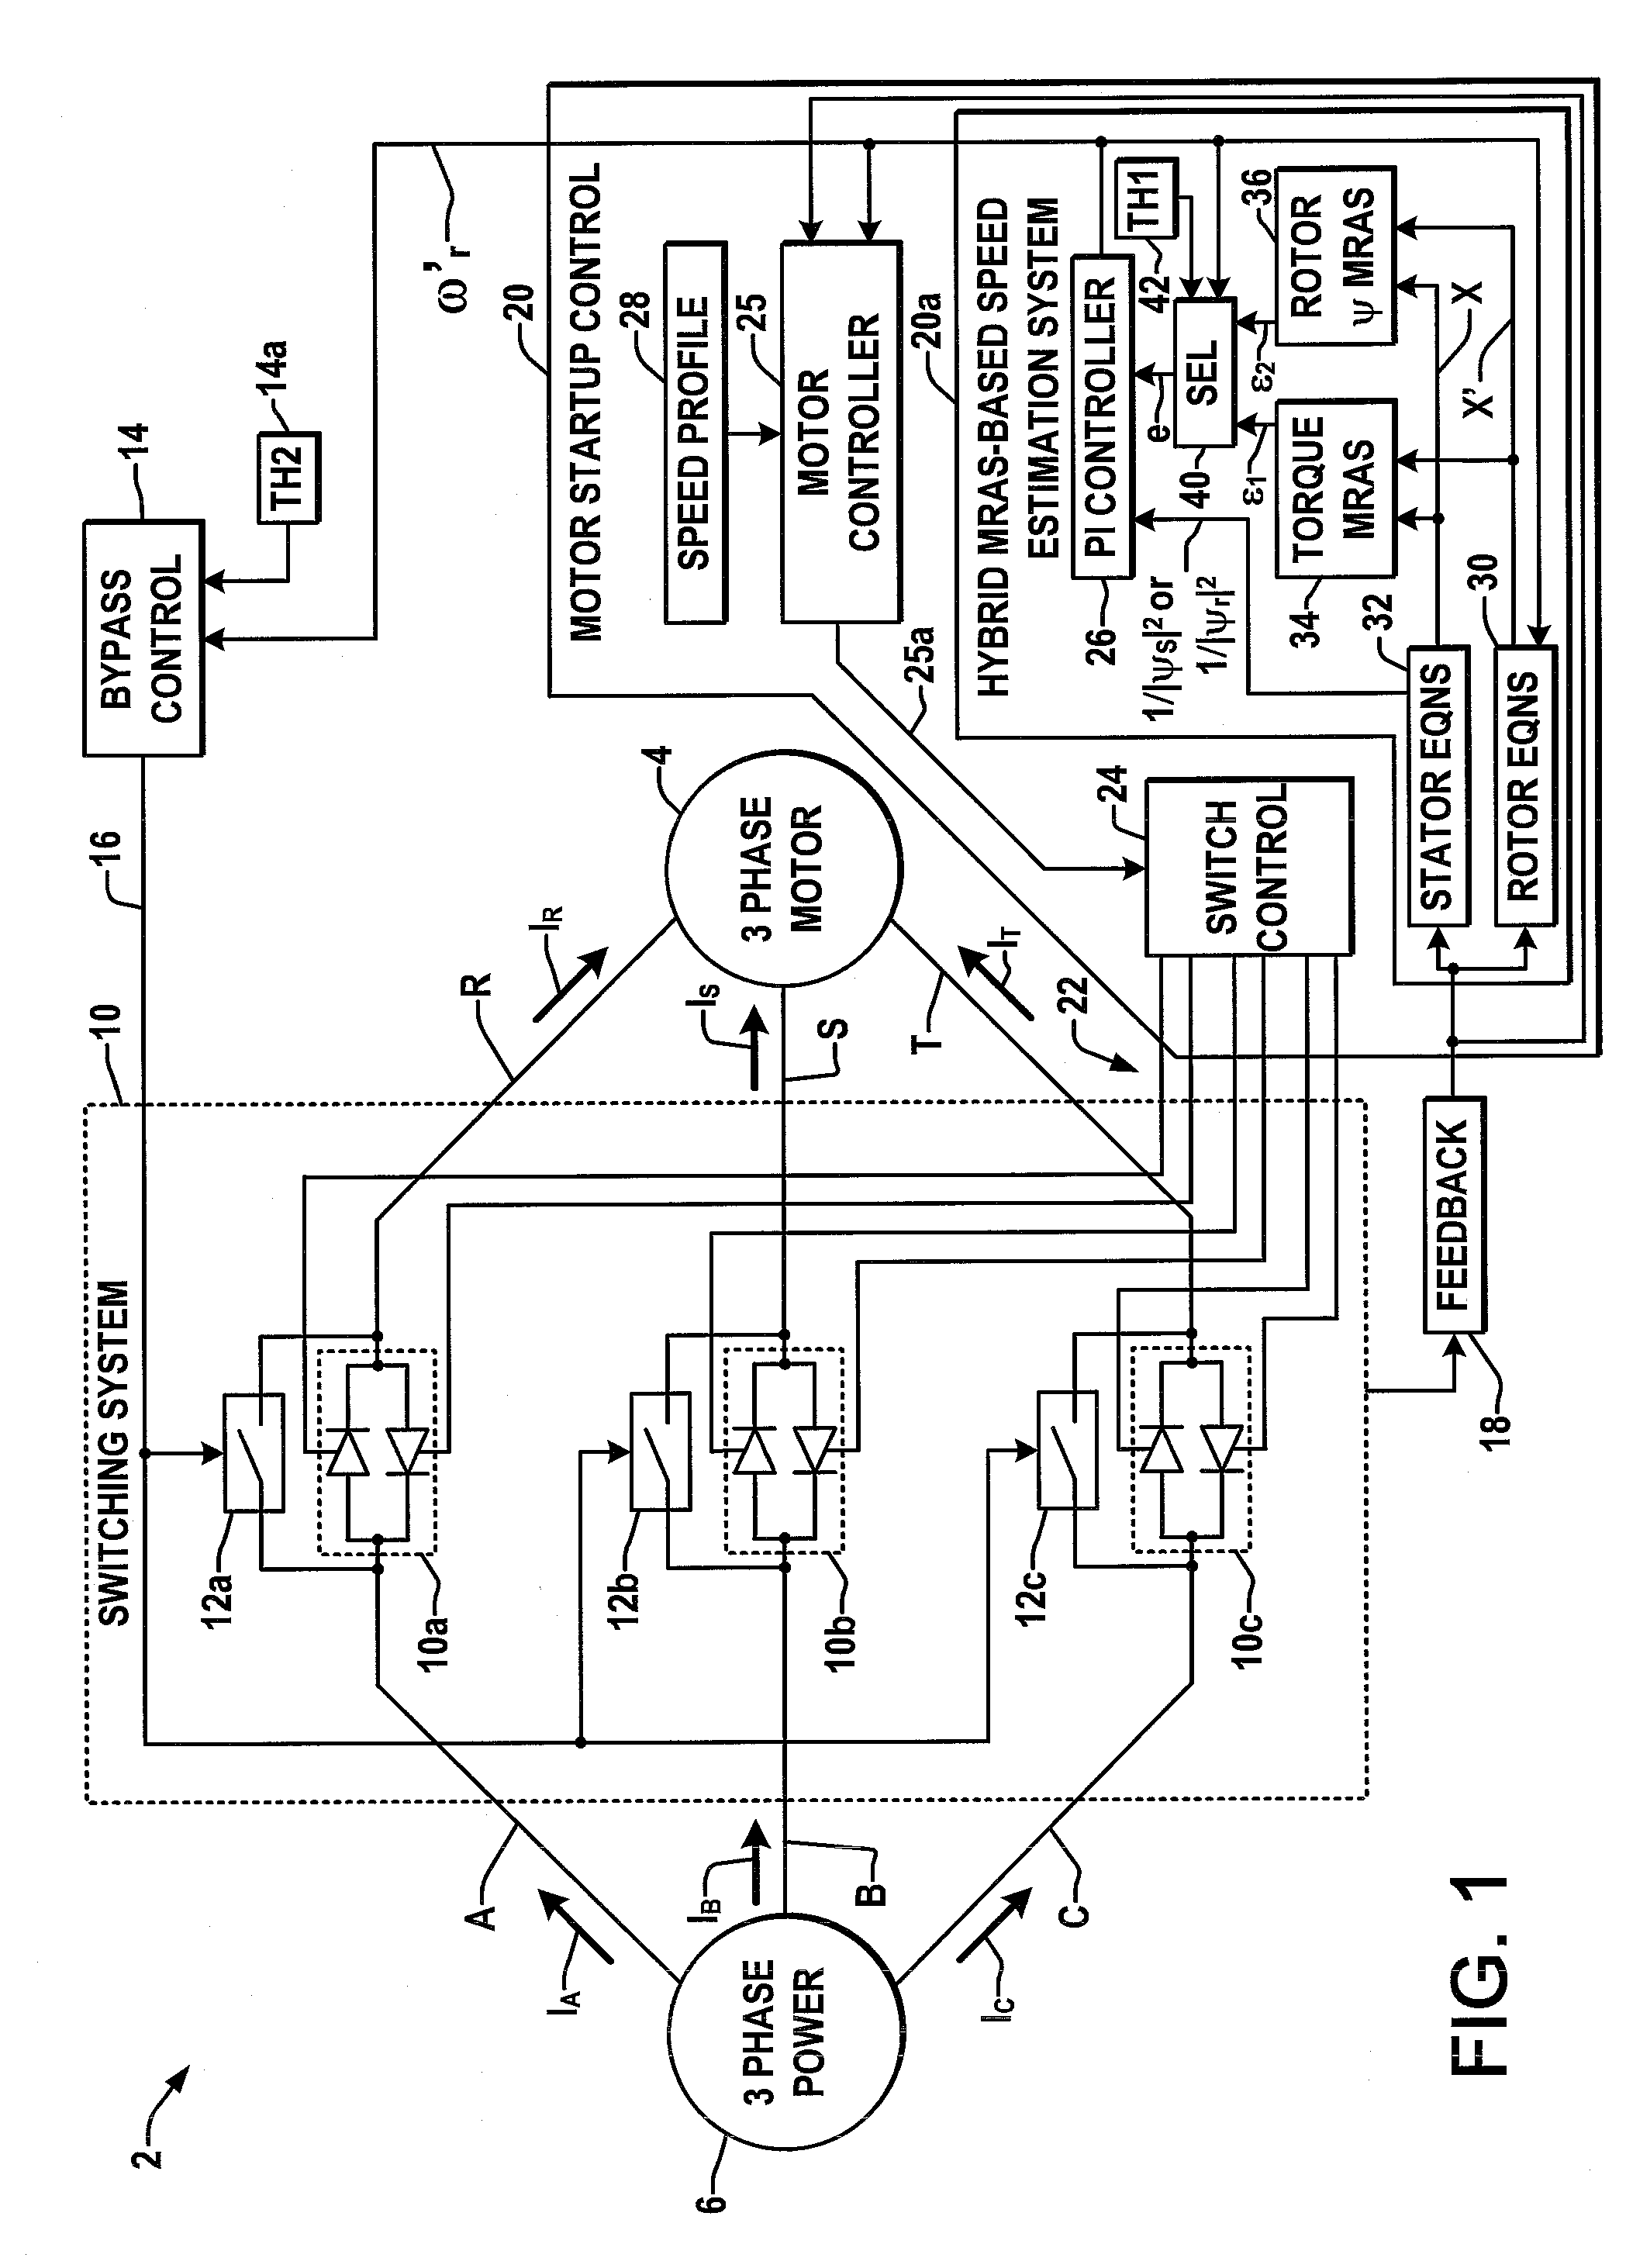 Motor speed estimation system and method using hybrid model reference adaptive system